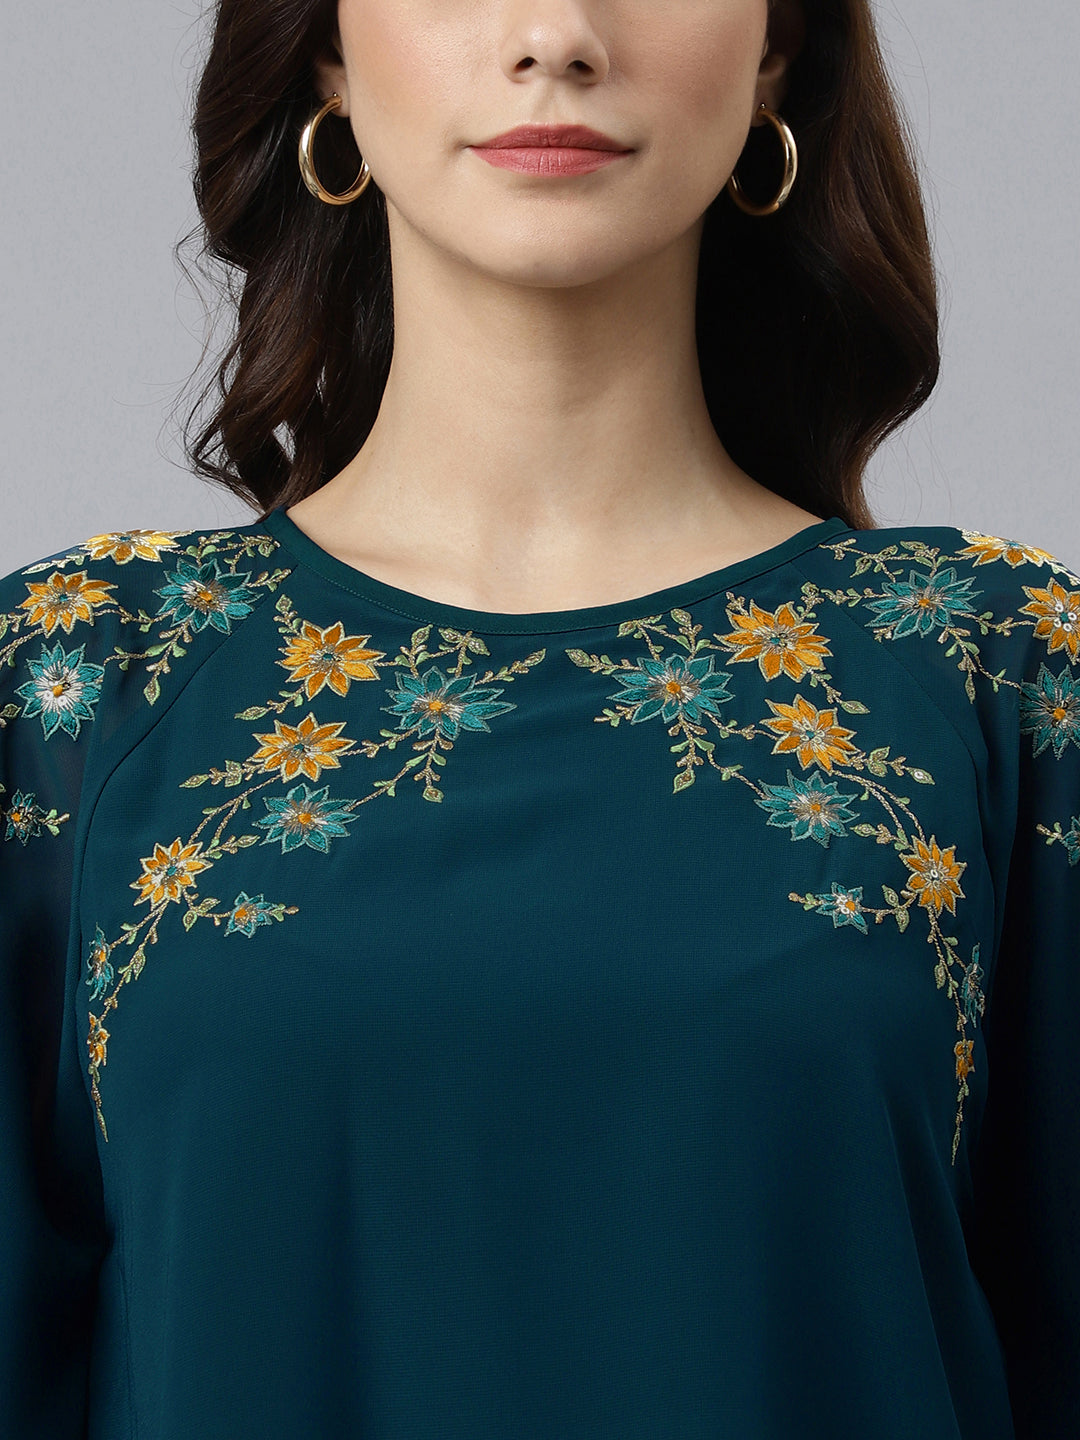 Teal Blue Georgette Embroidered Ethnic Top